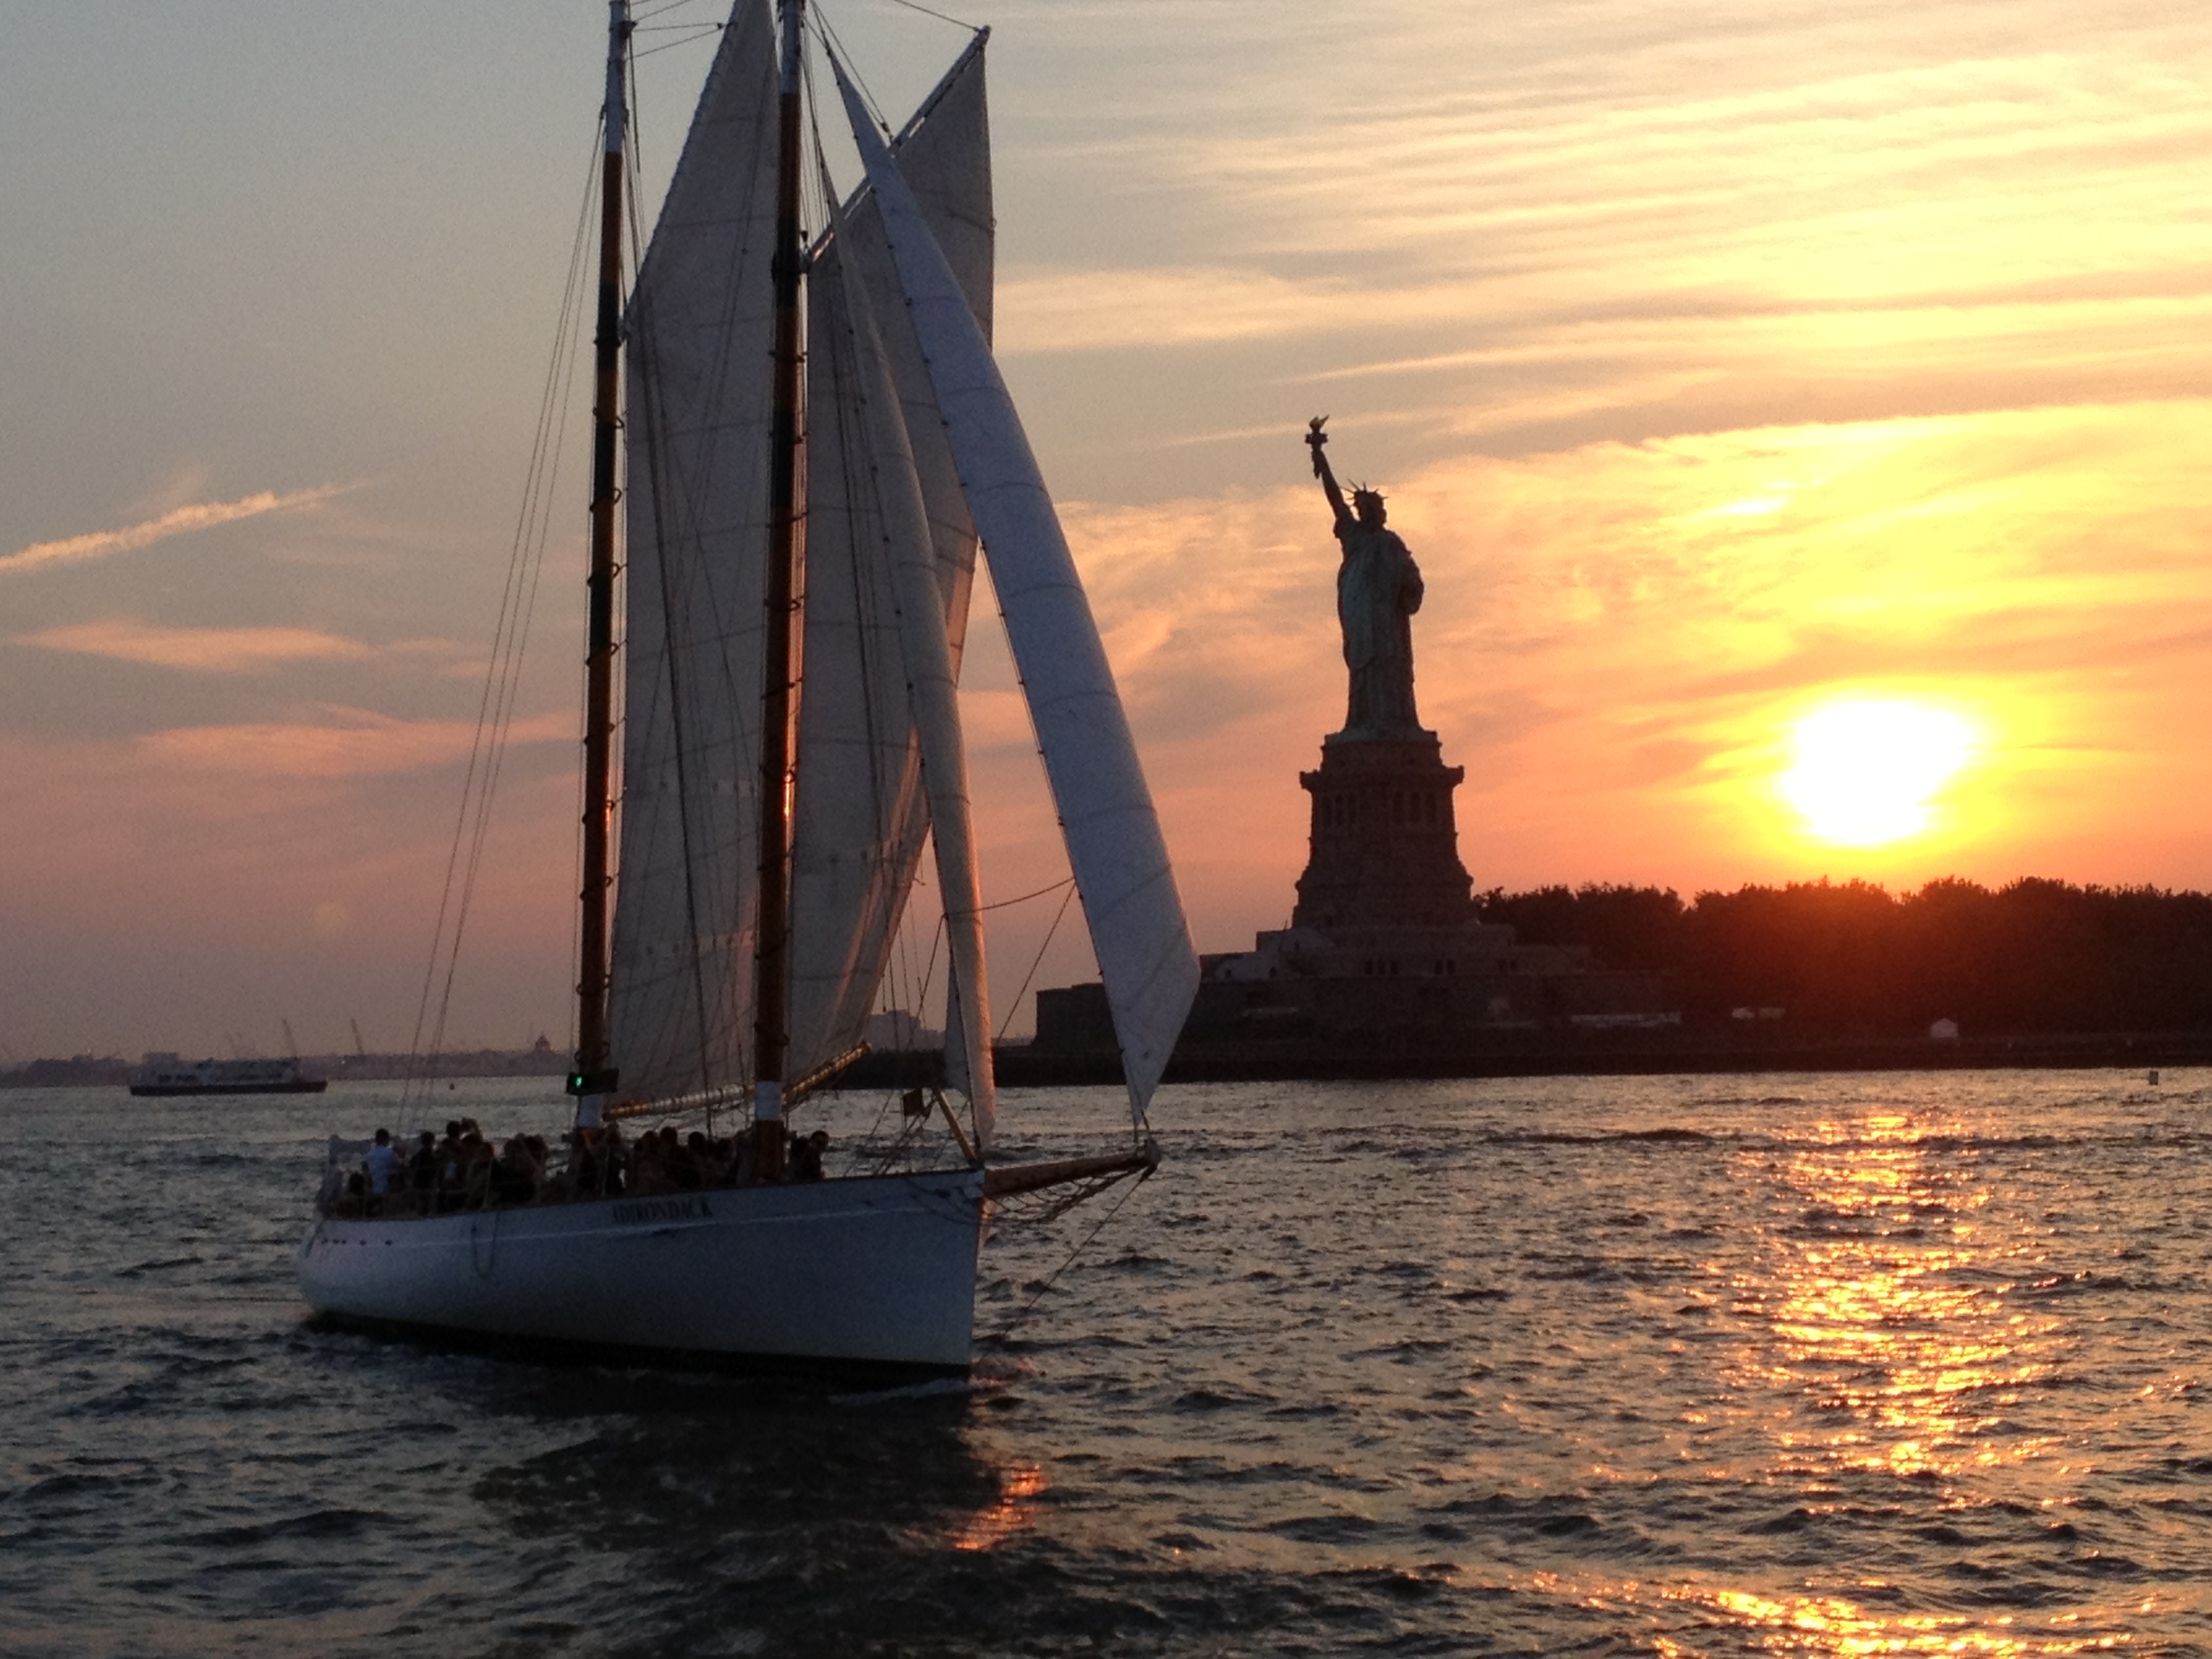 Full boat photo of the Schooner Adirondack sailing past the Statue of Liberty as the sun dips beyond the horizon